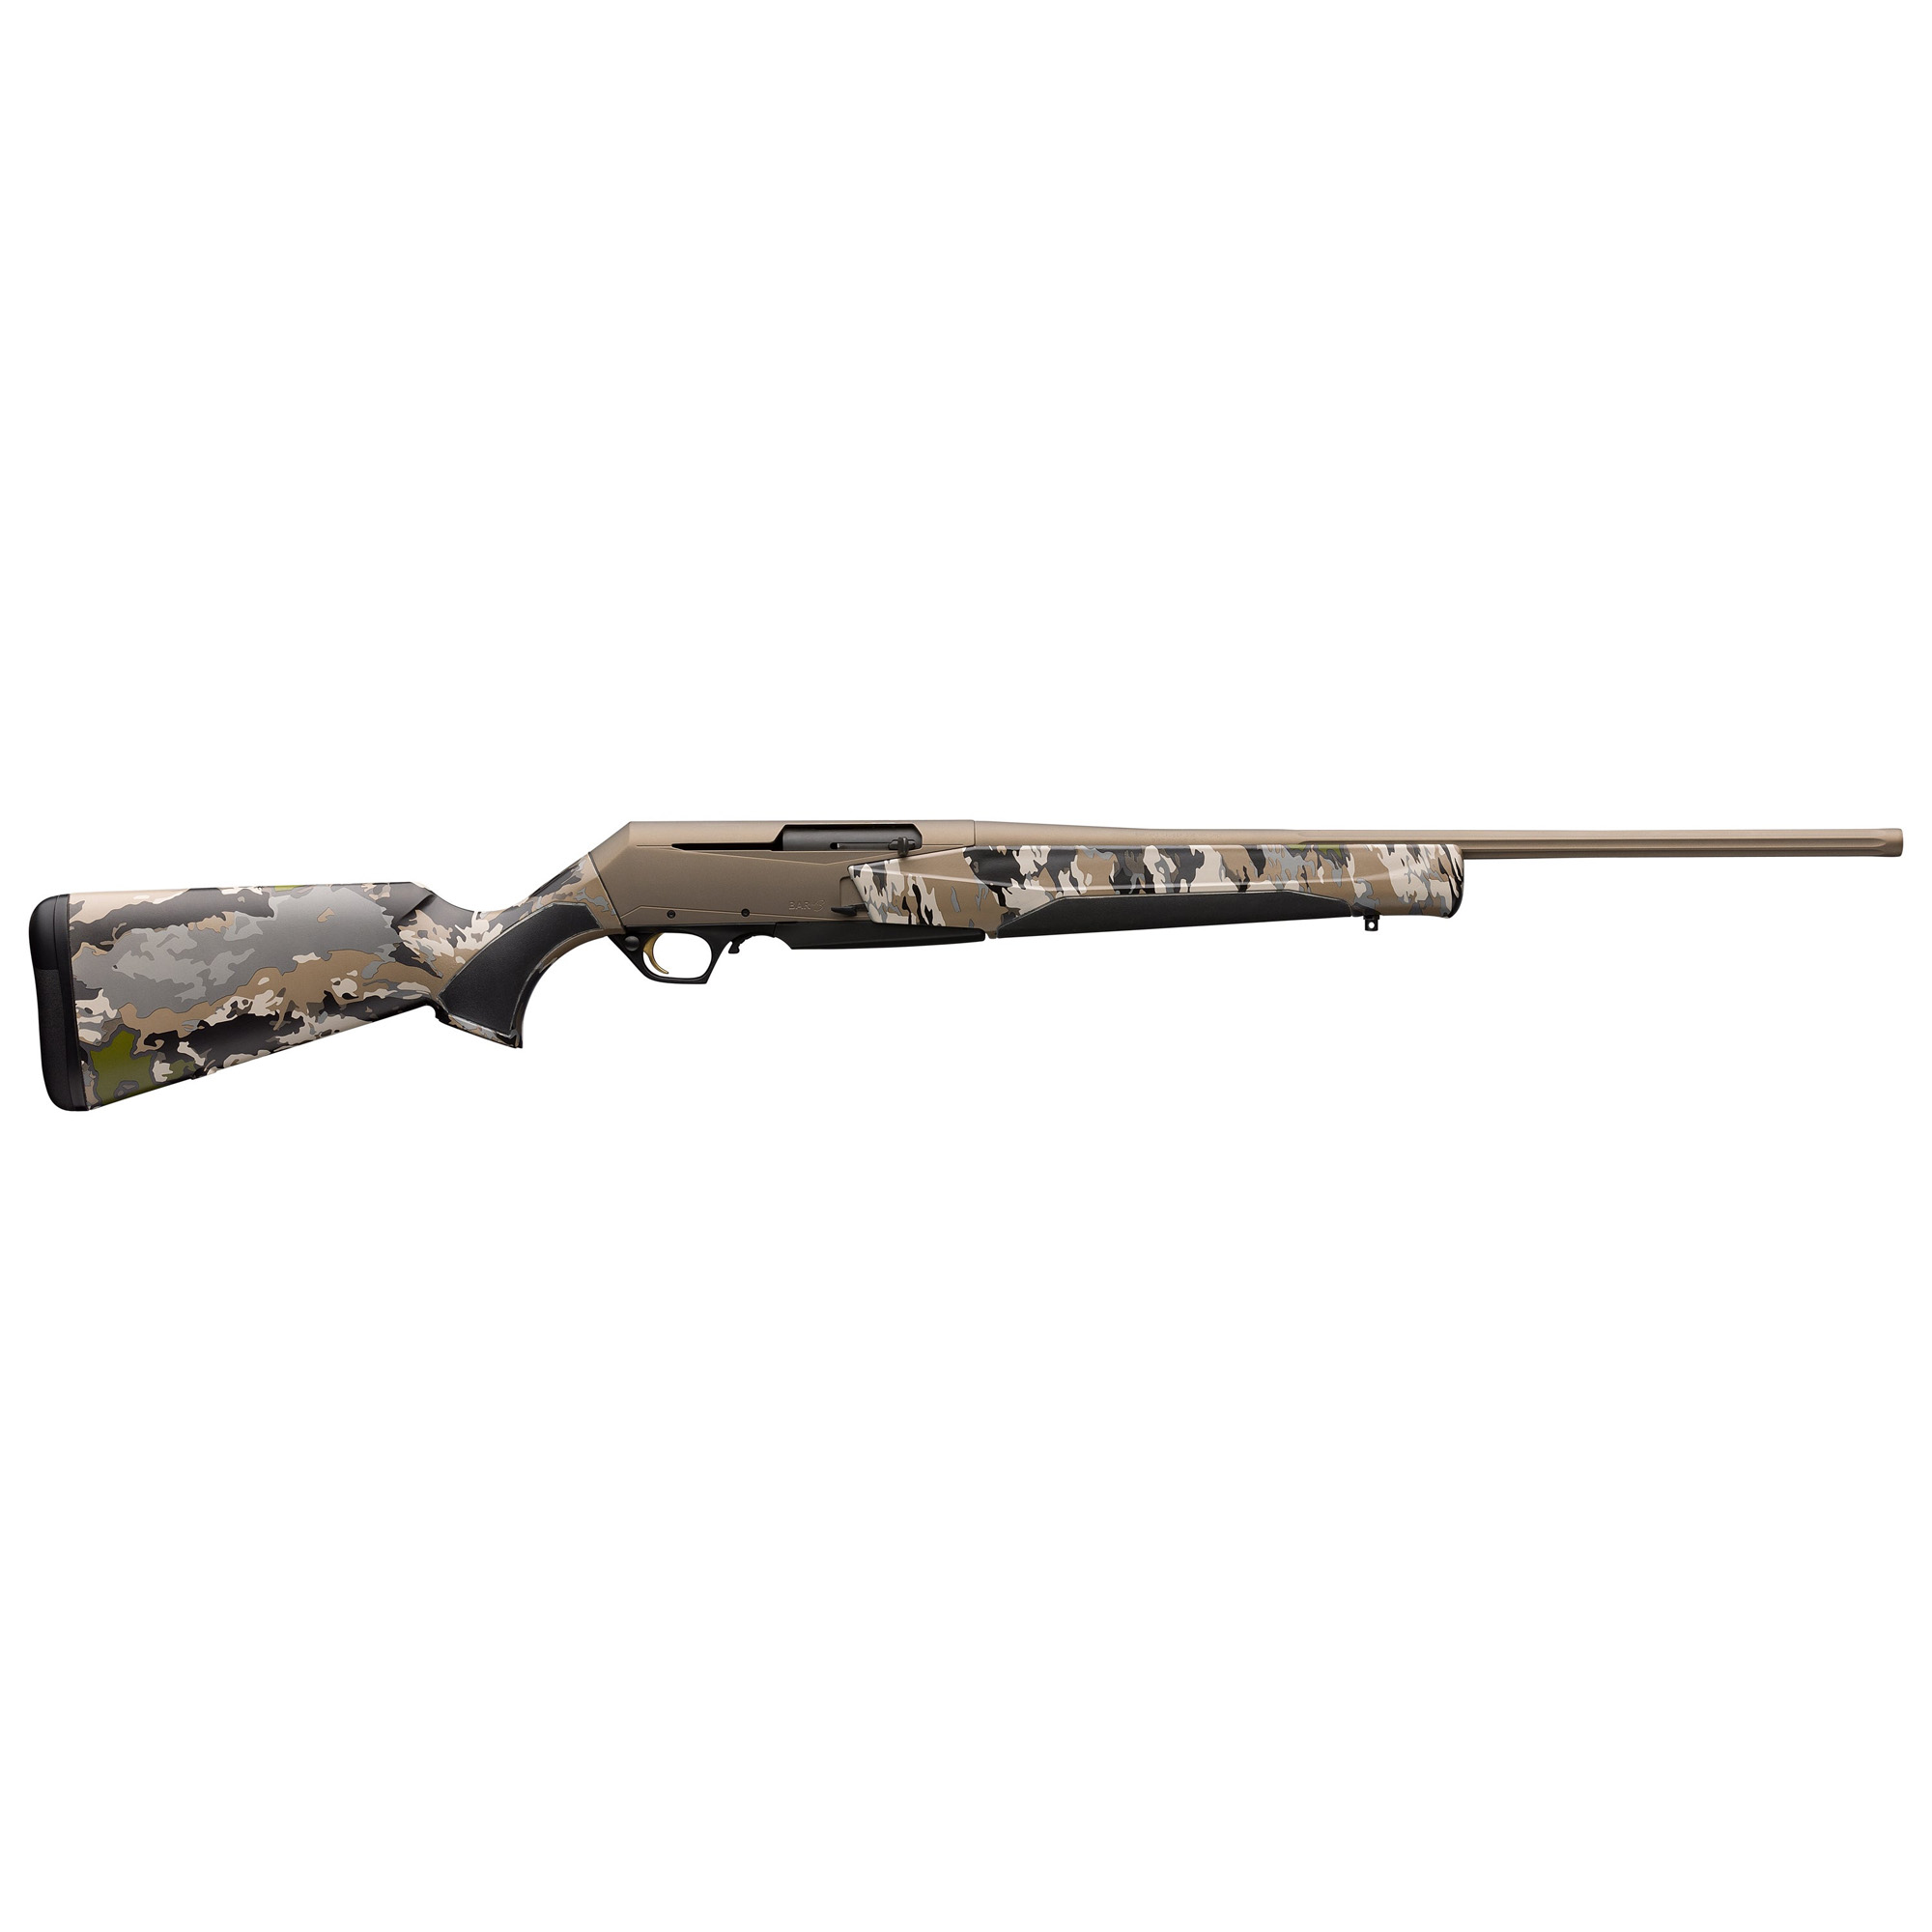 Browning, BAR MK3 Speed, Hunting Rifle, Semi-automatic, 308 Winchester, 22" Barrel, Fluted Barrel, Smoked Bronze, OVIX Camo Stock, 4 Rounds, Right Hand